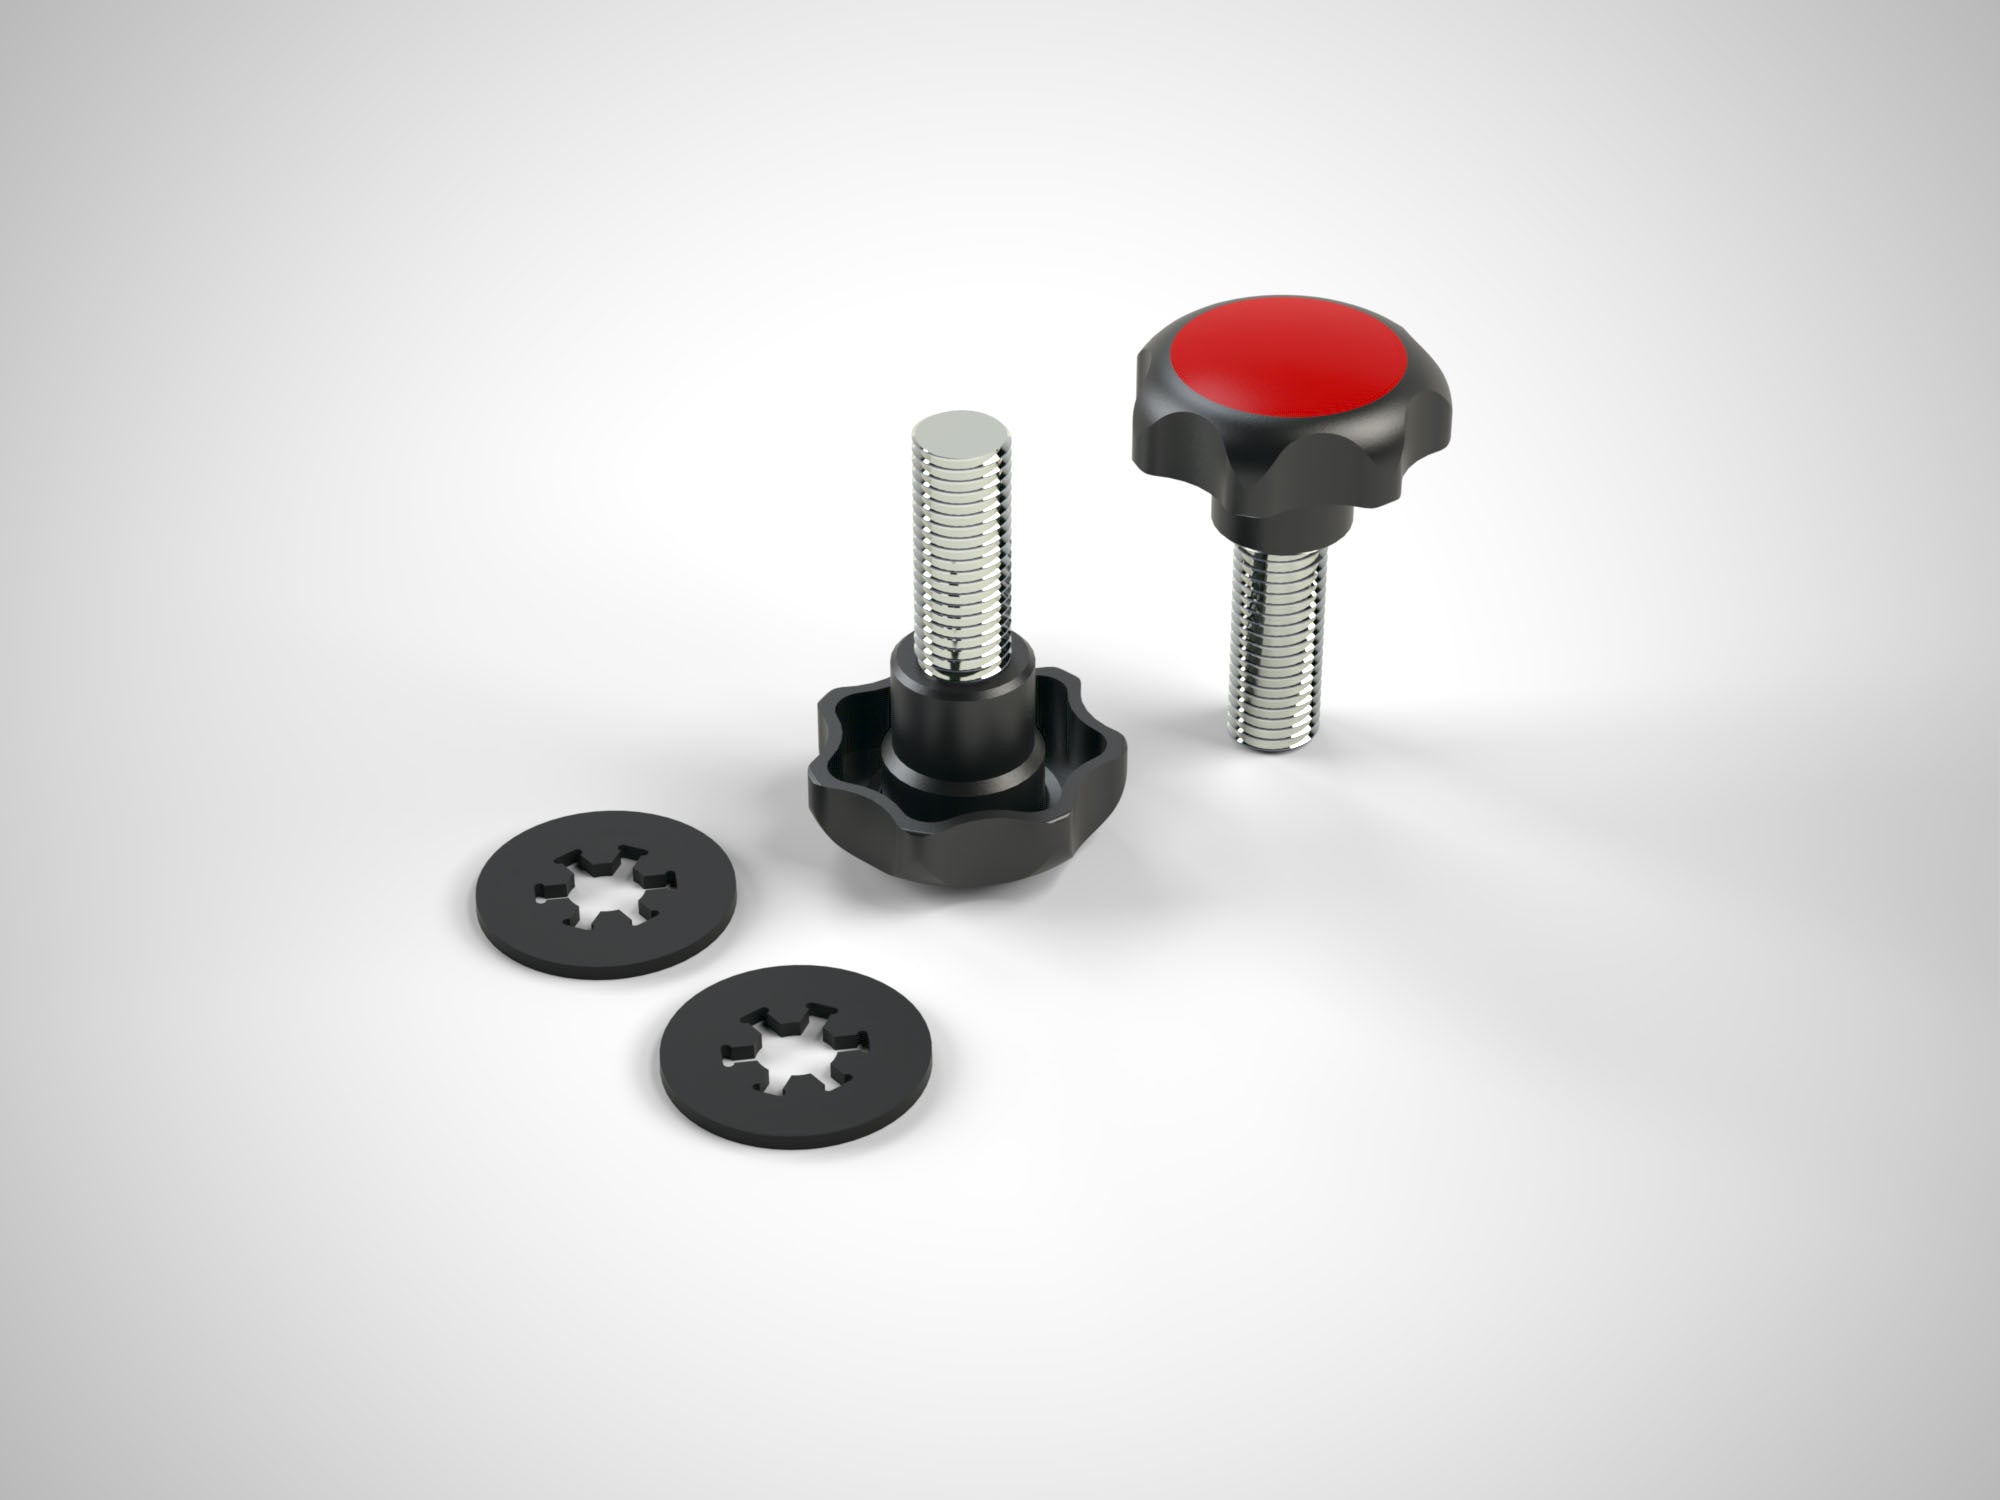 M8 Star Grip Knobs with Delrin washers for clamping dogs to MFT type table.